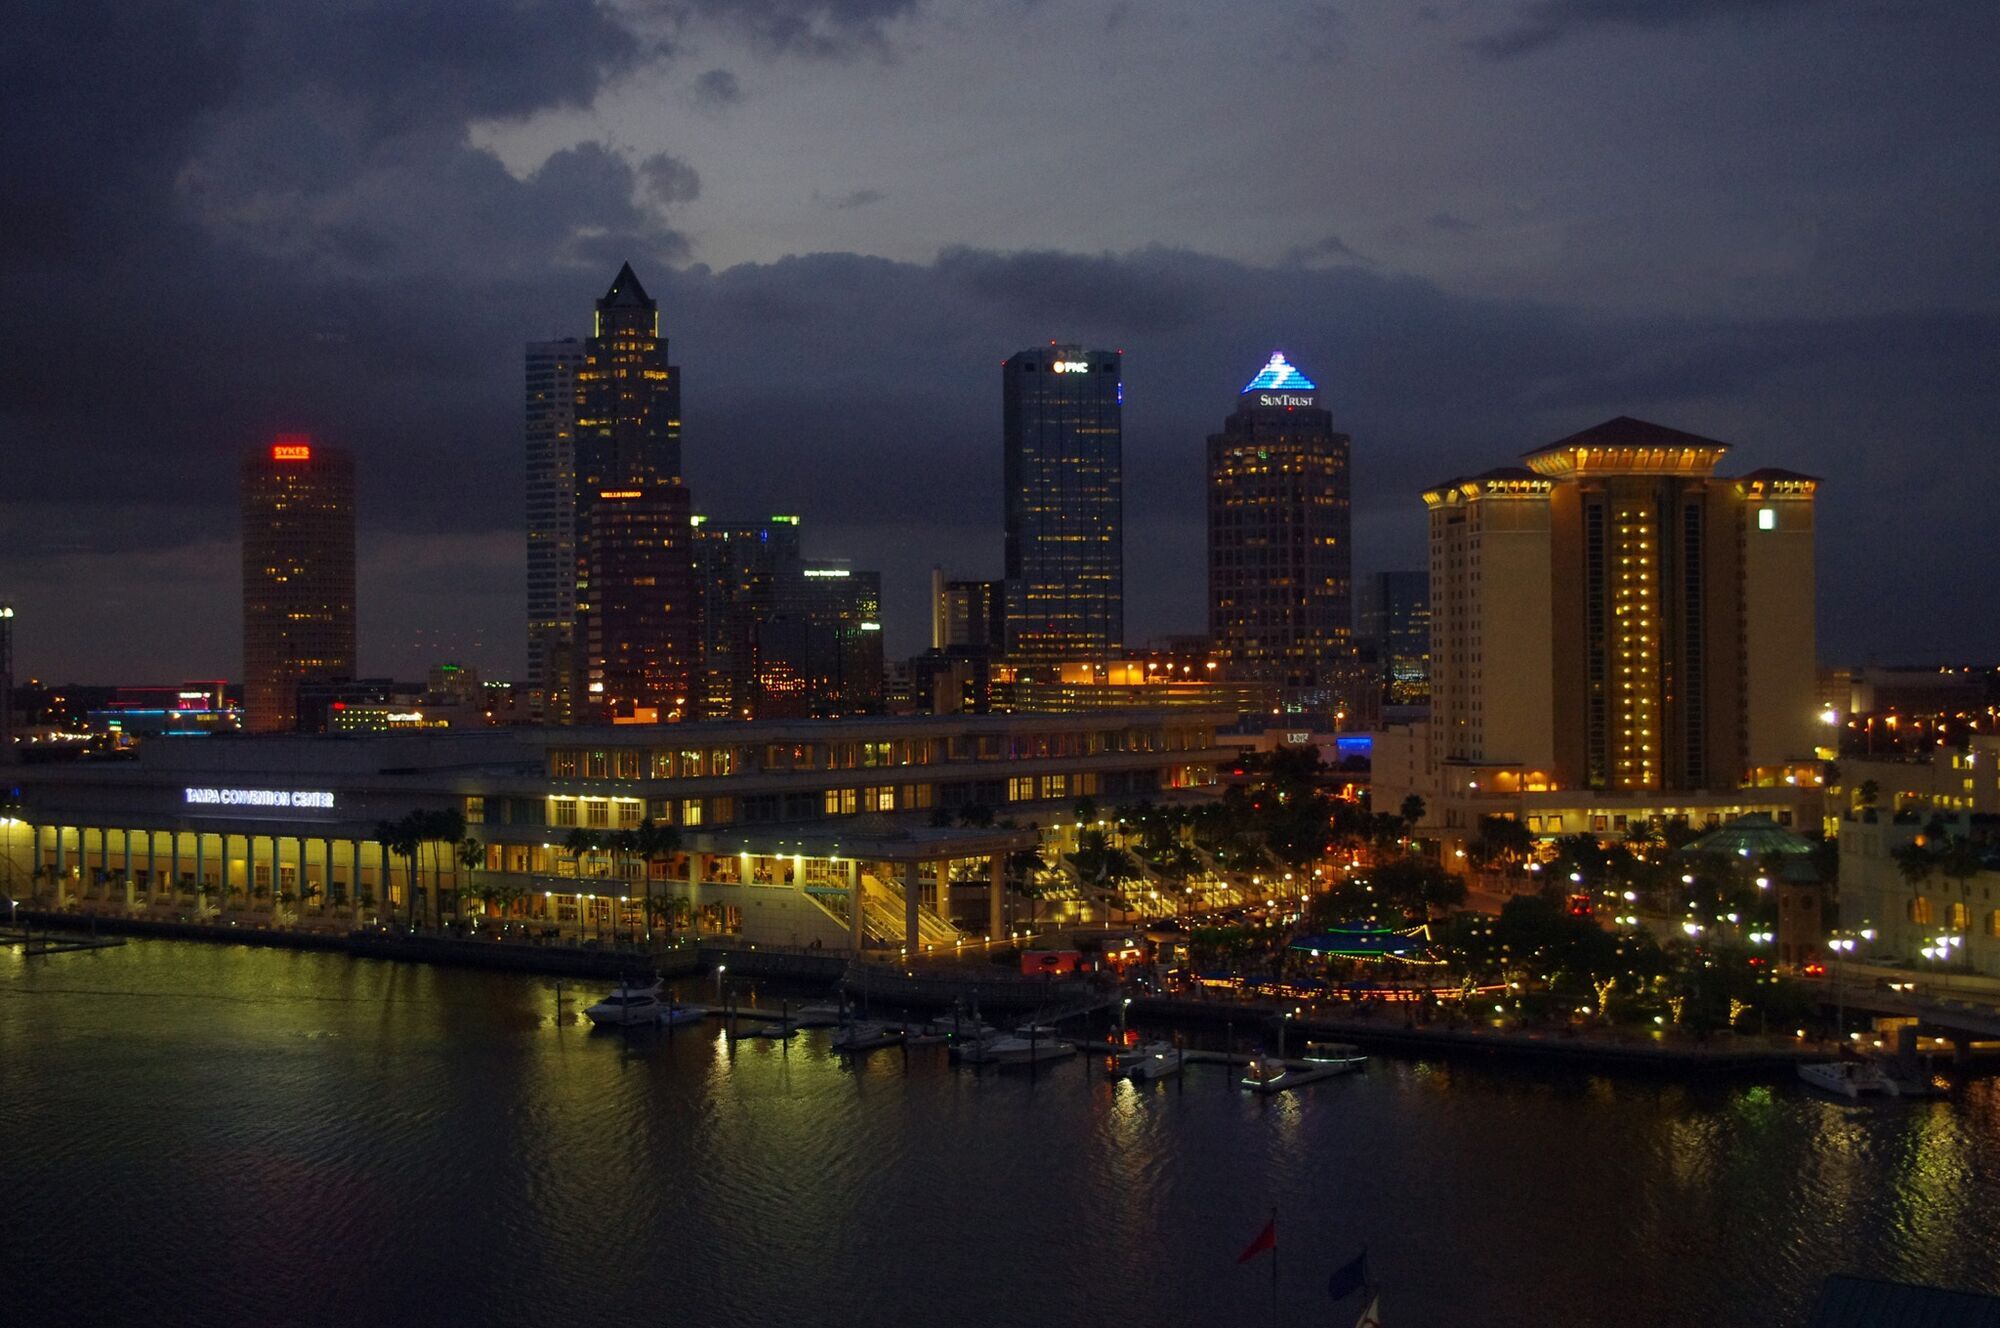 Spring break in Florida: How to spend great time in Tampa Bay